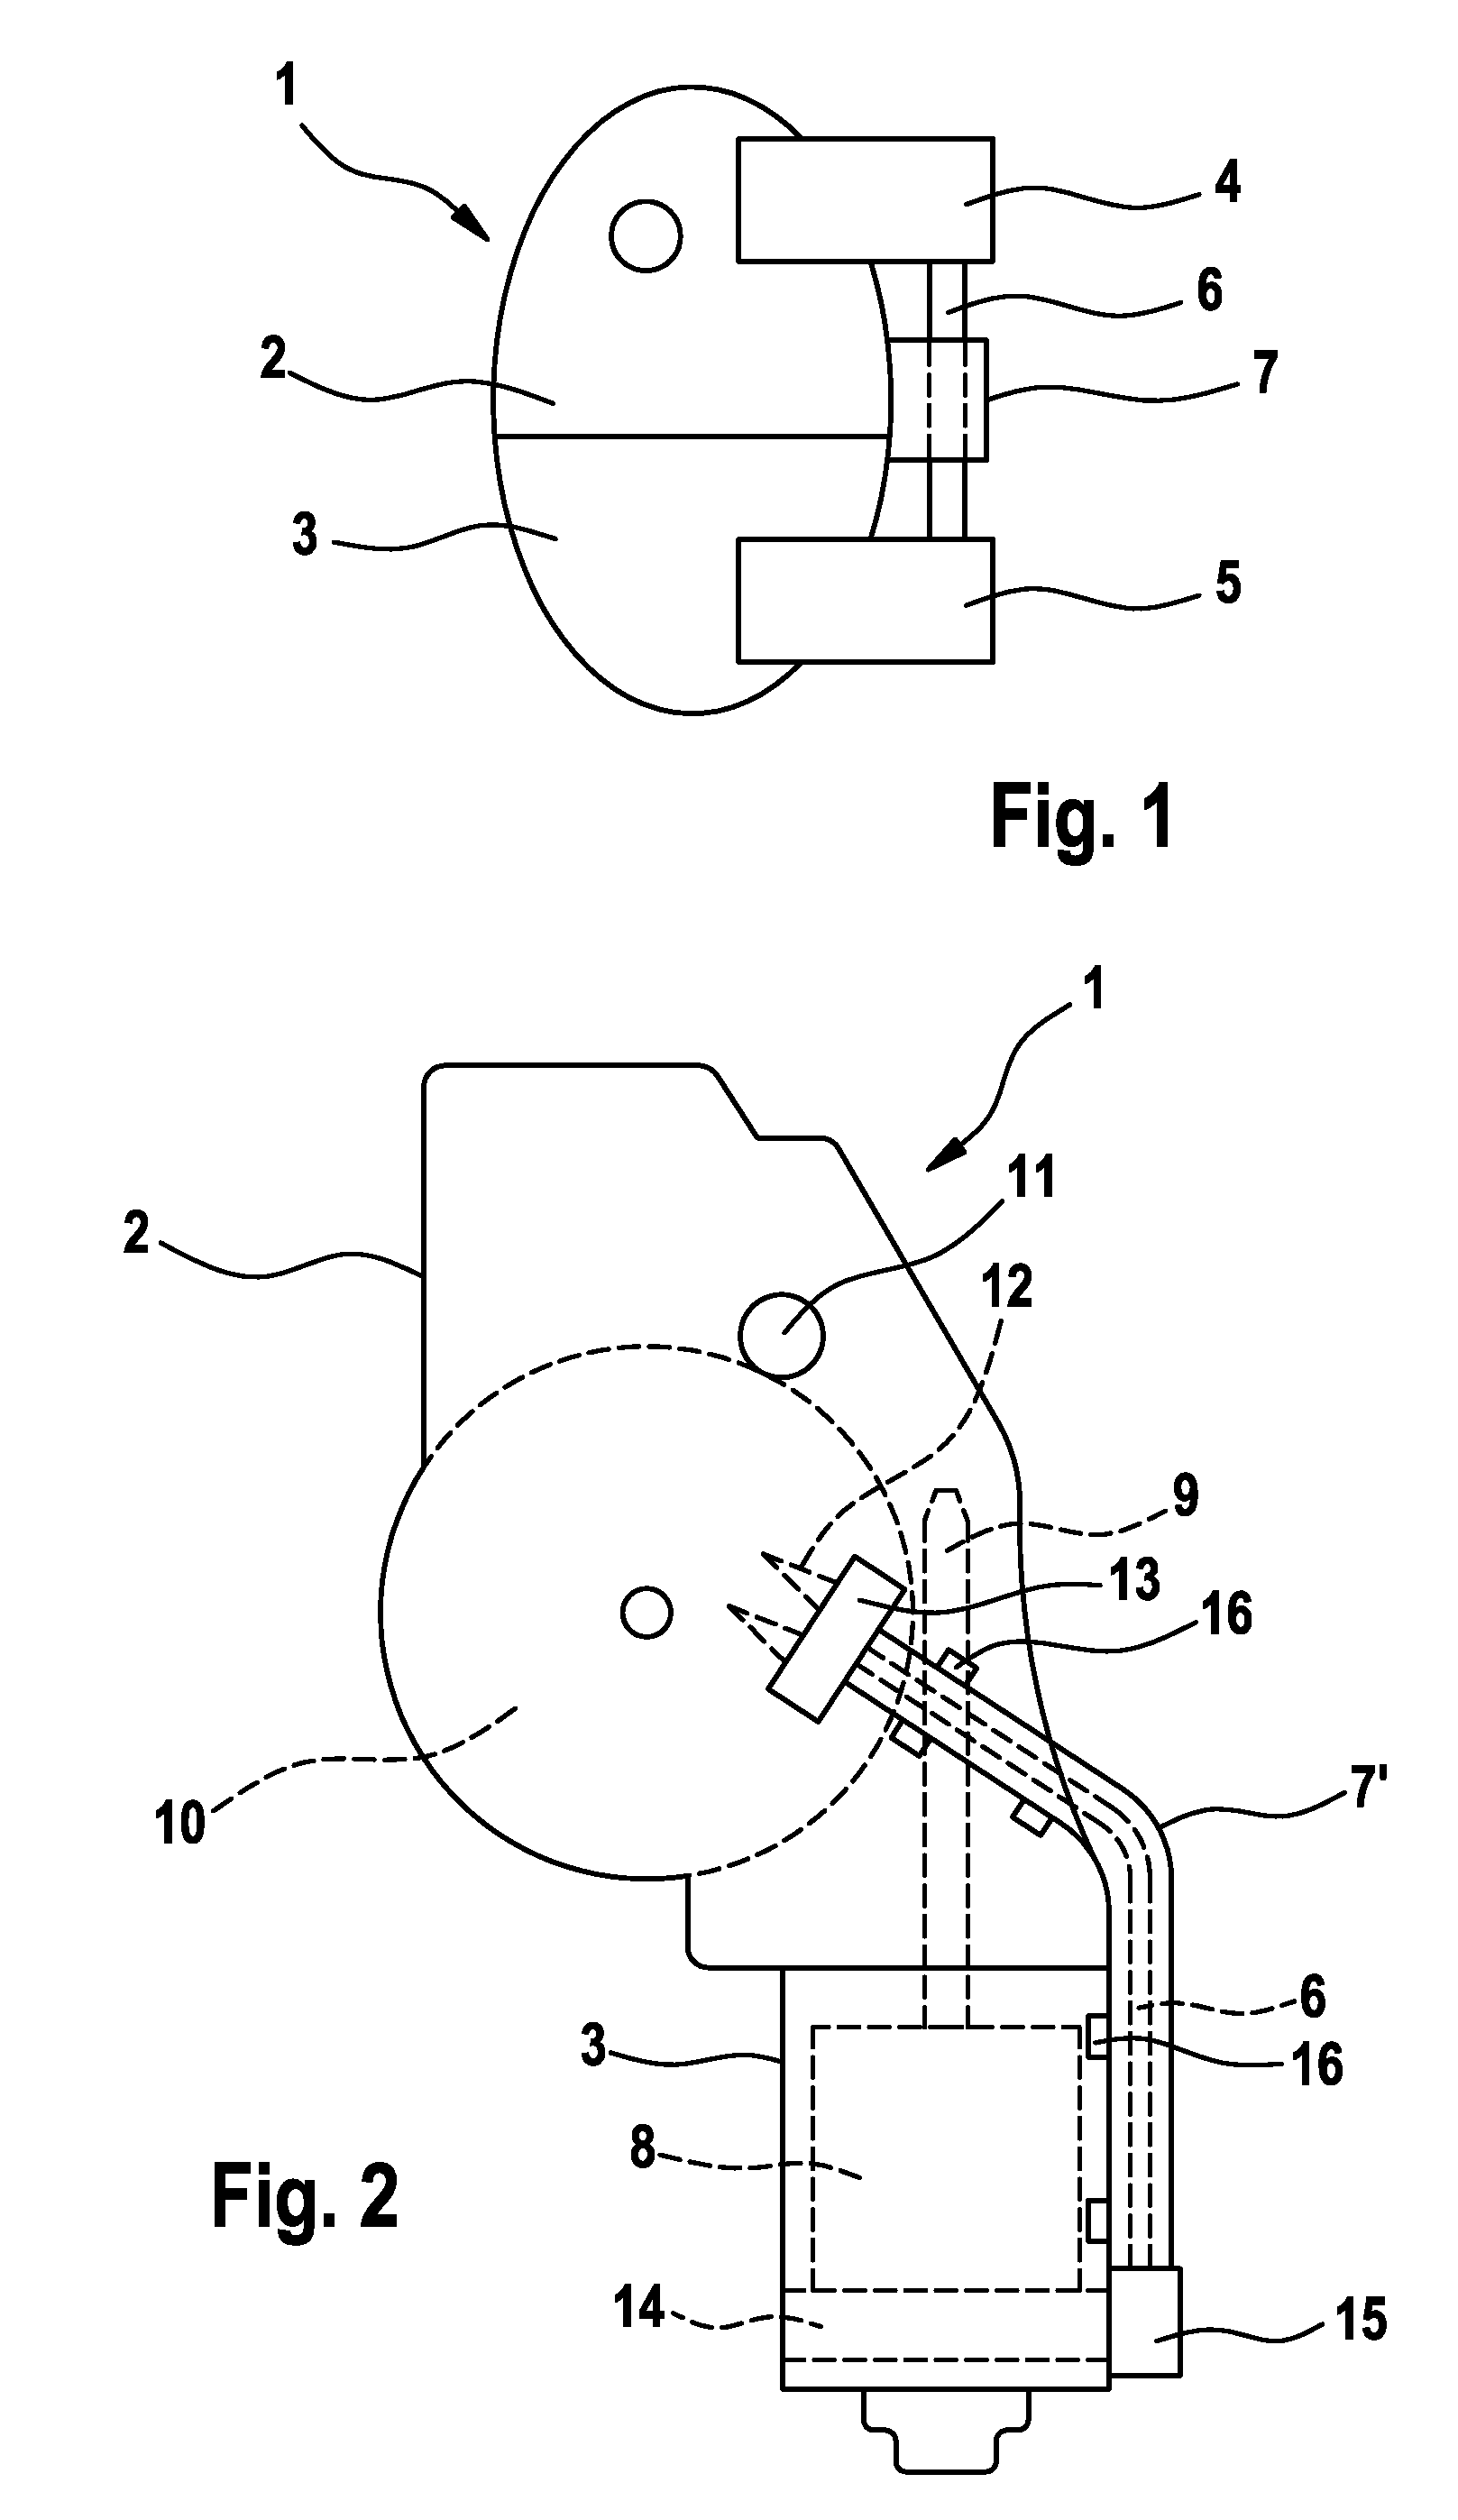 Connection system comprising an external cable guide on wiper motor housings